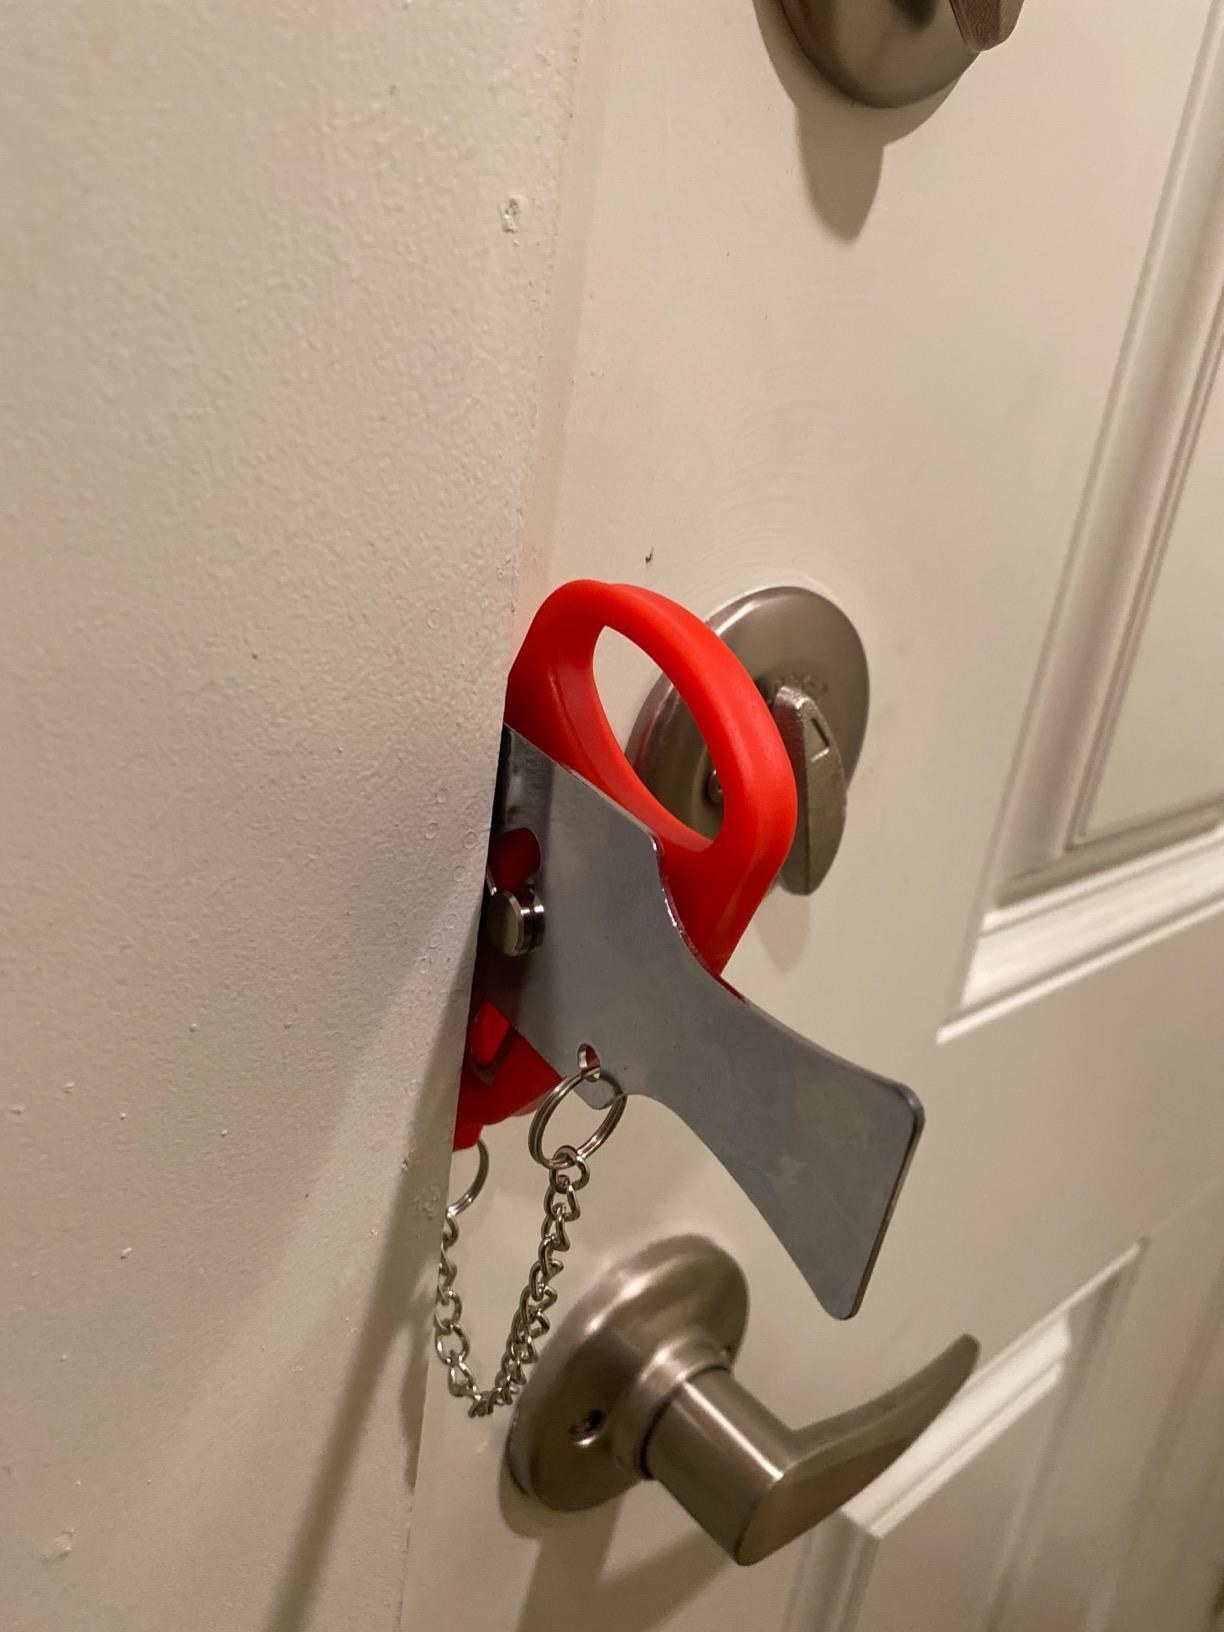 the lock securely placed inside white door